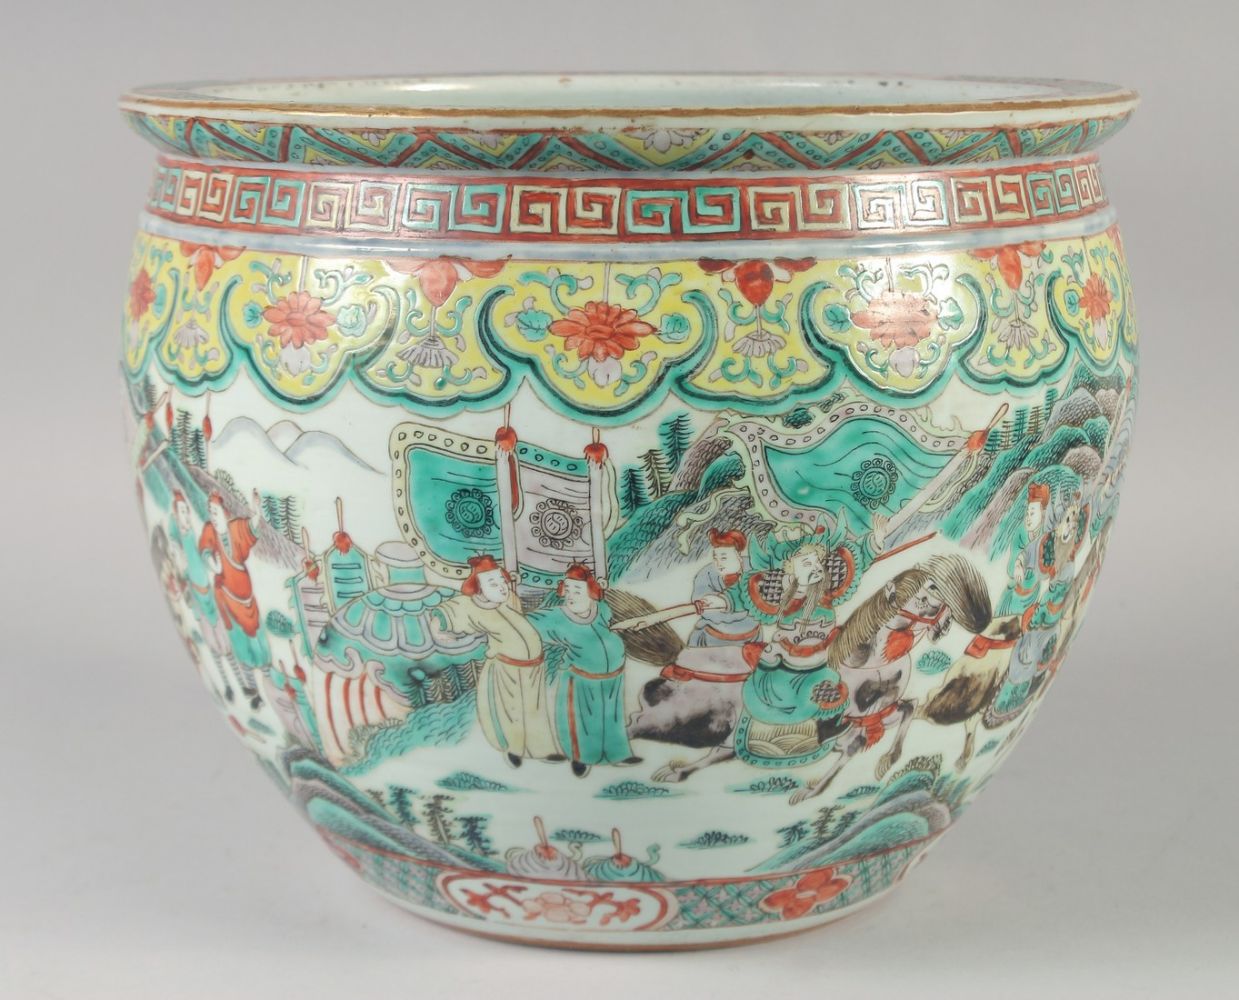 An Auction of Oriental, Islamic Art and Decorative Interior Items